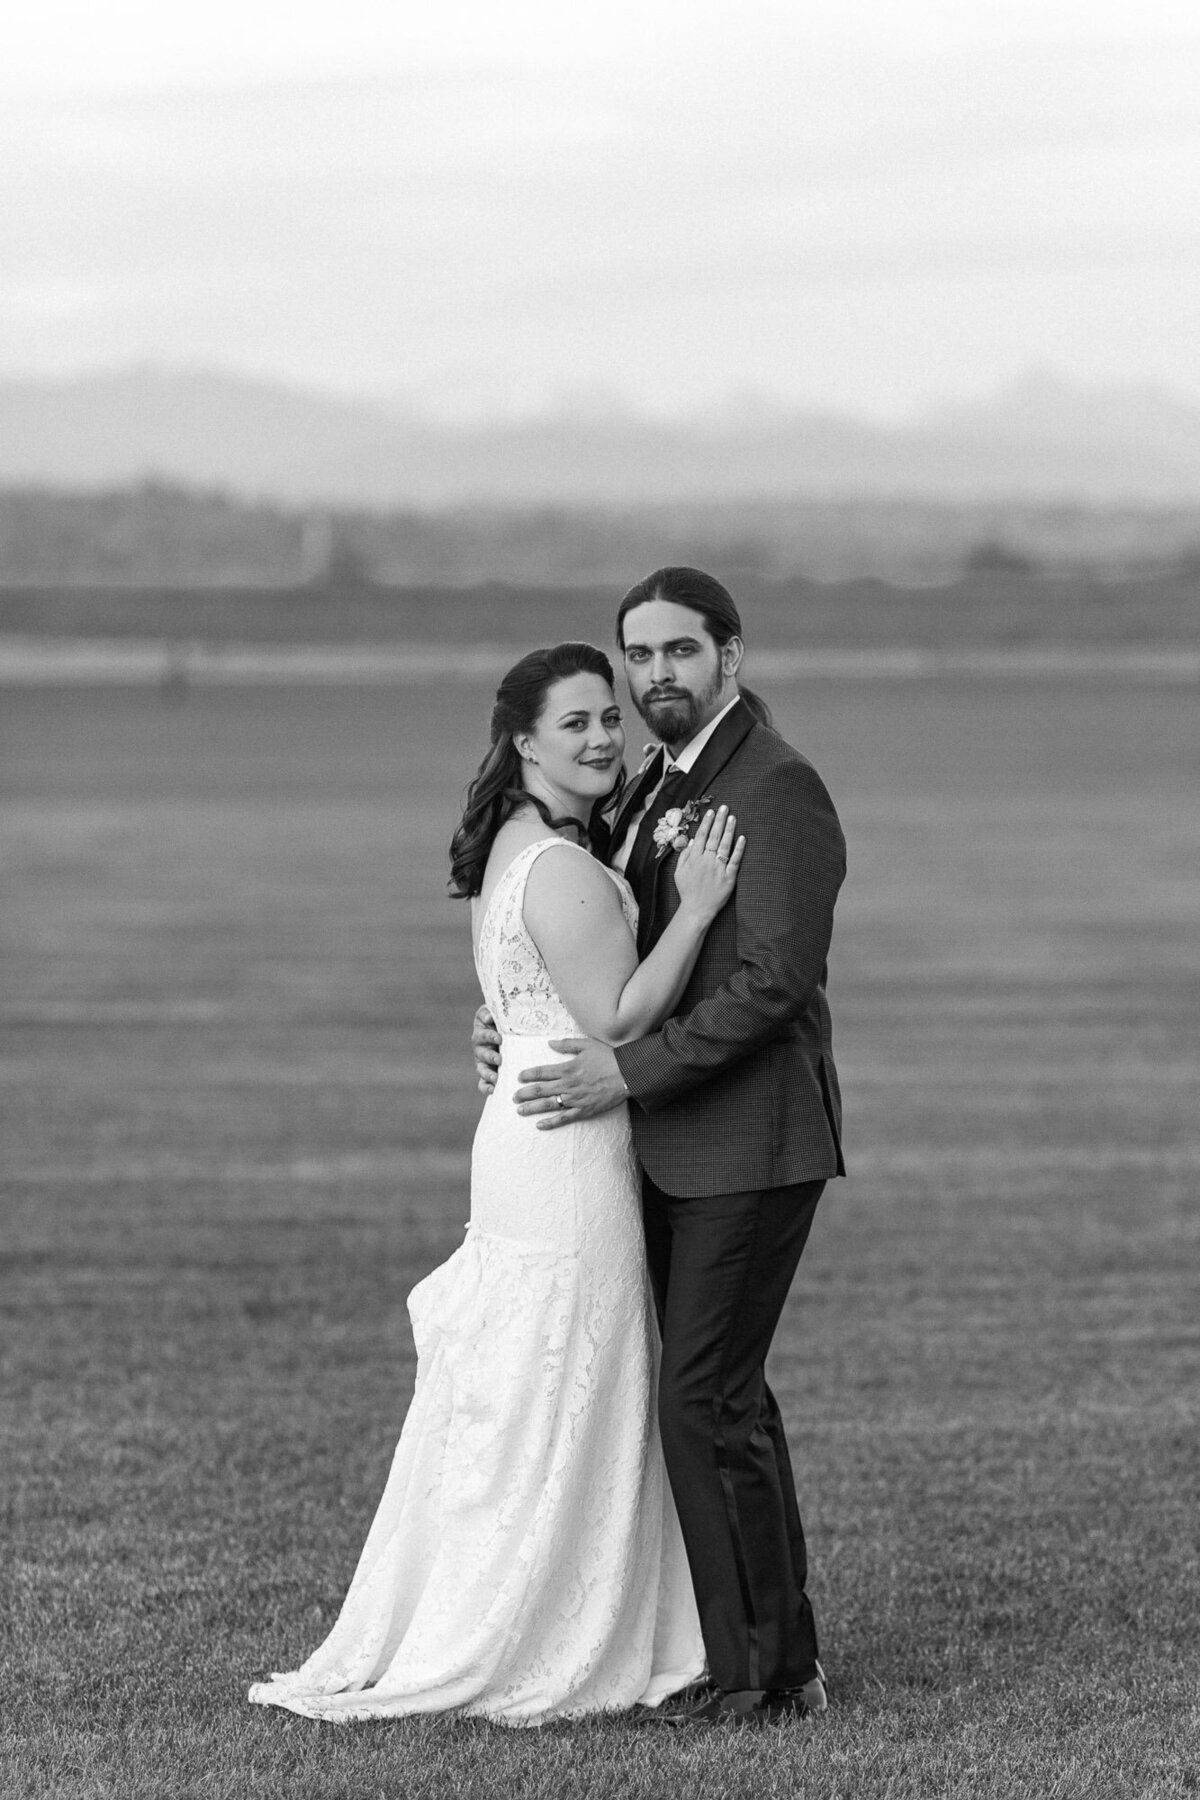 Black-and-white-photo-of-bride-and-groom-on-their-wedding-day-at-outdoor-venue-Hidden-Meadows-in-Snohomish-WA-photo-by-Joanna-Monger-Photography